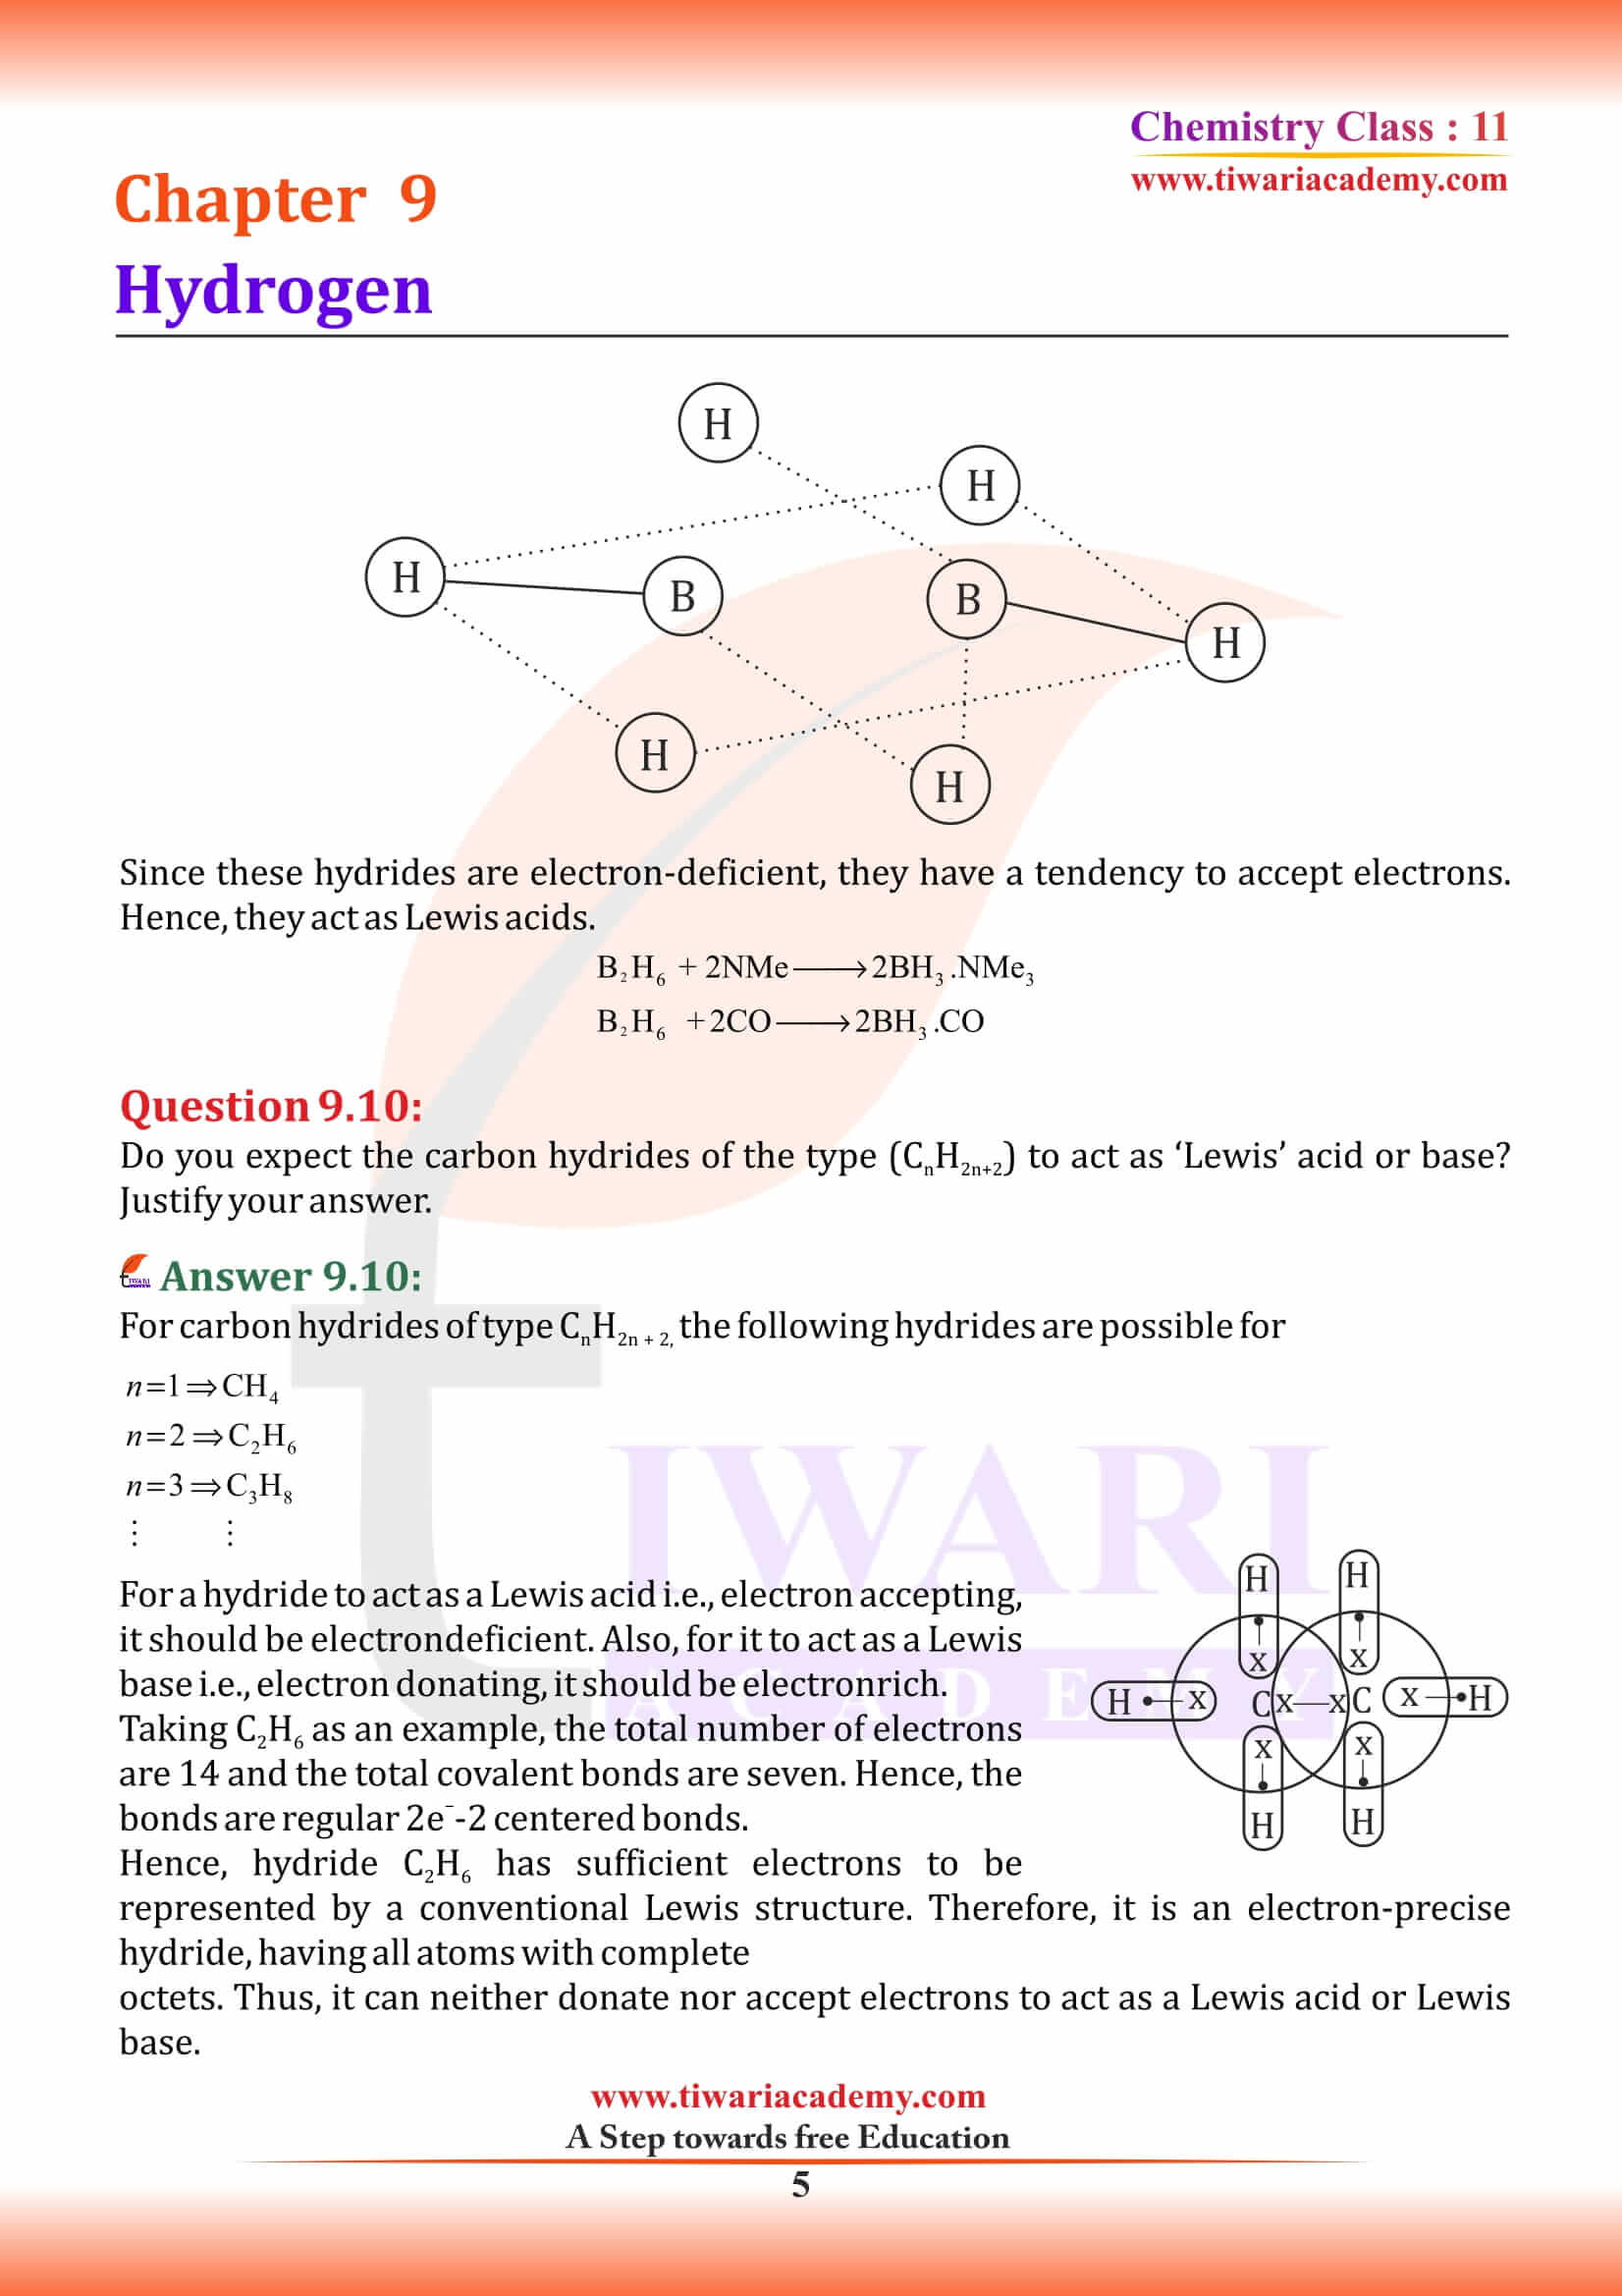 NCERT Solutions for Class 11 Chemistry Chapter 9 Intext Exercise